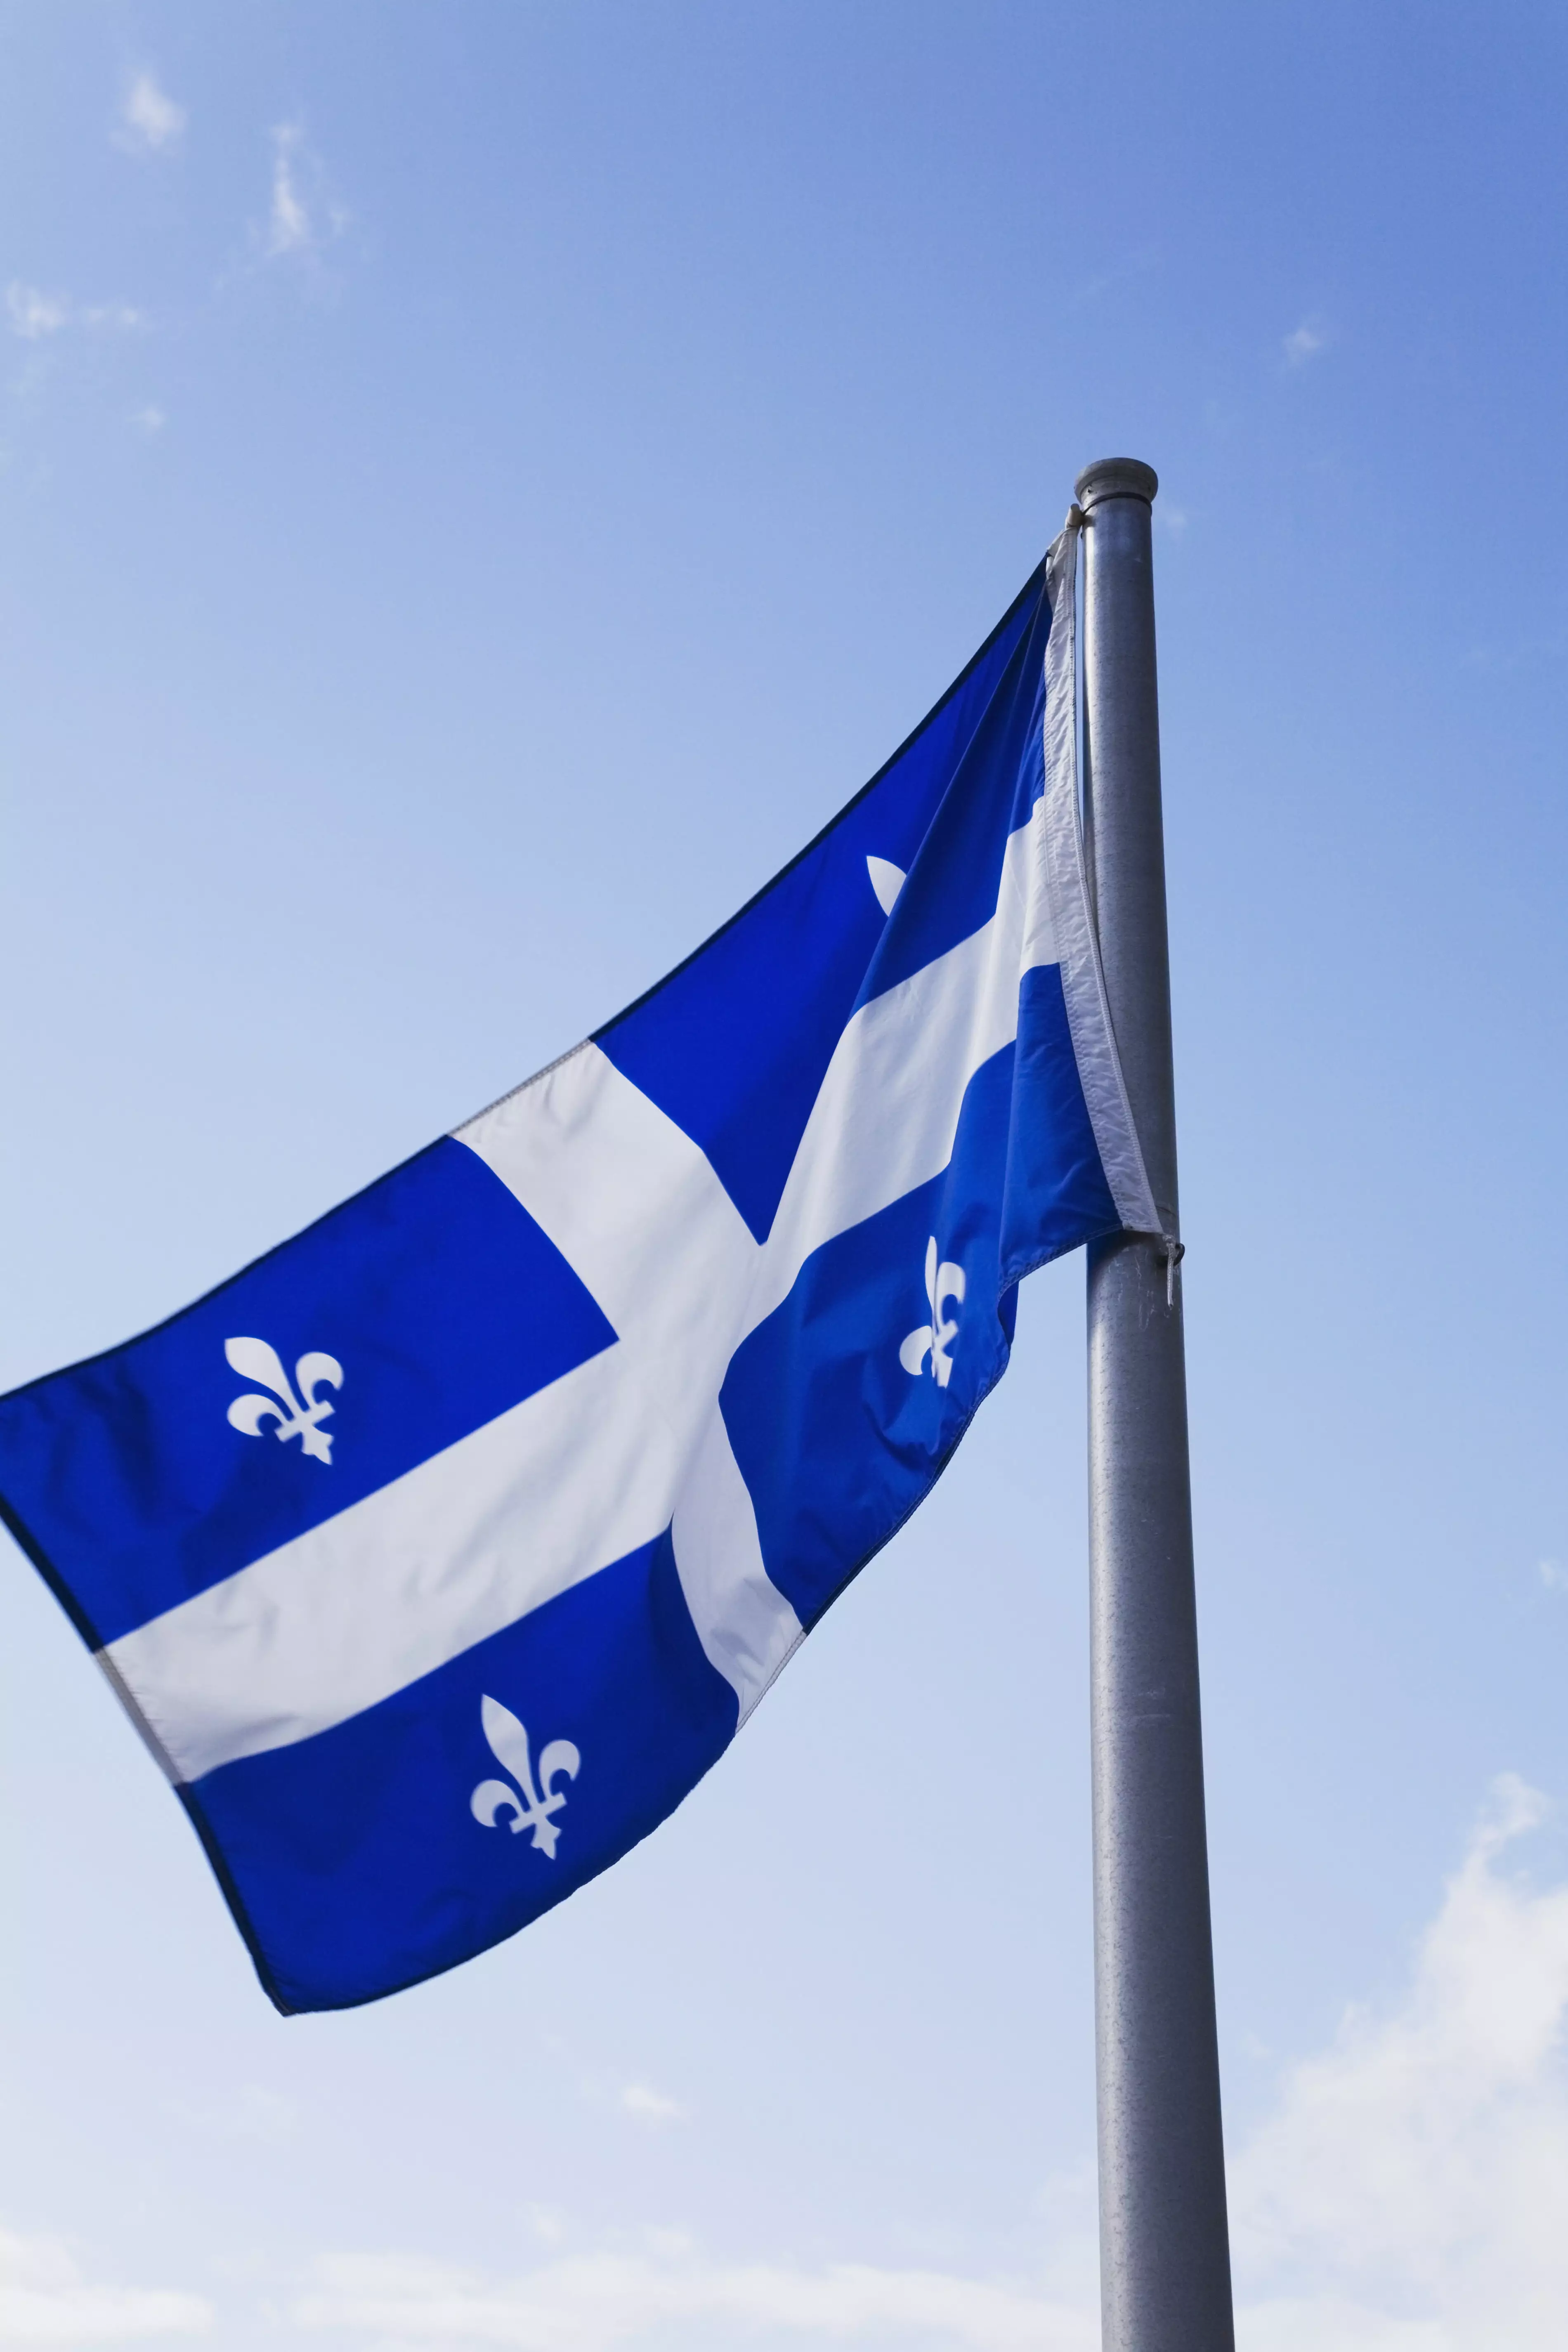 The flag of Quebec.